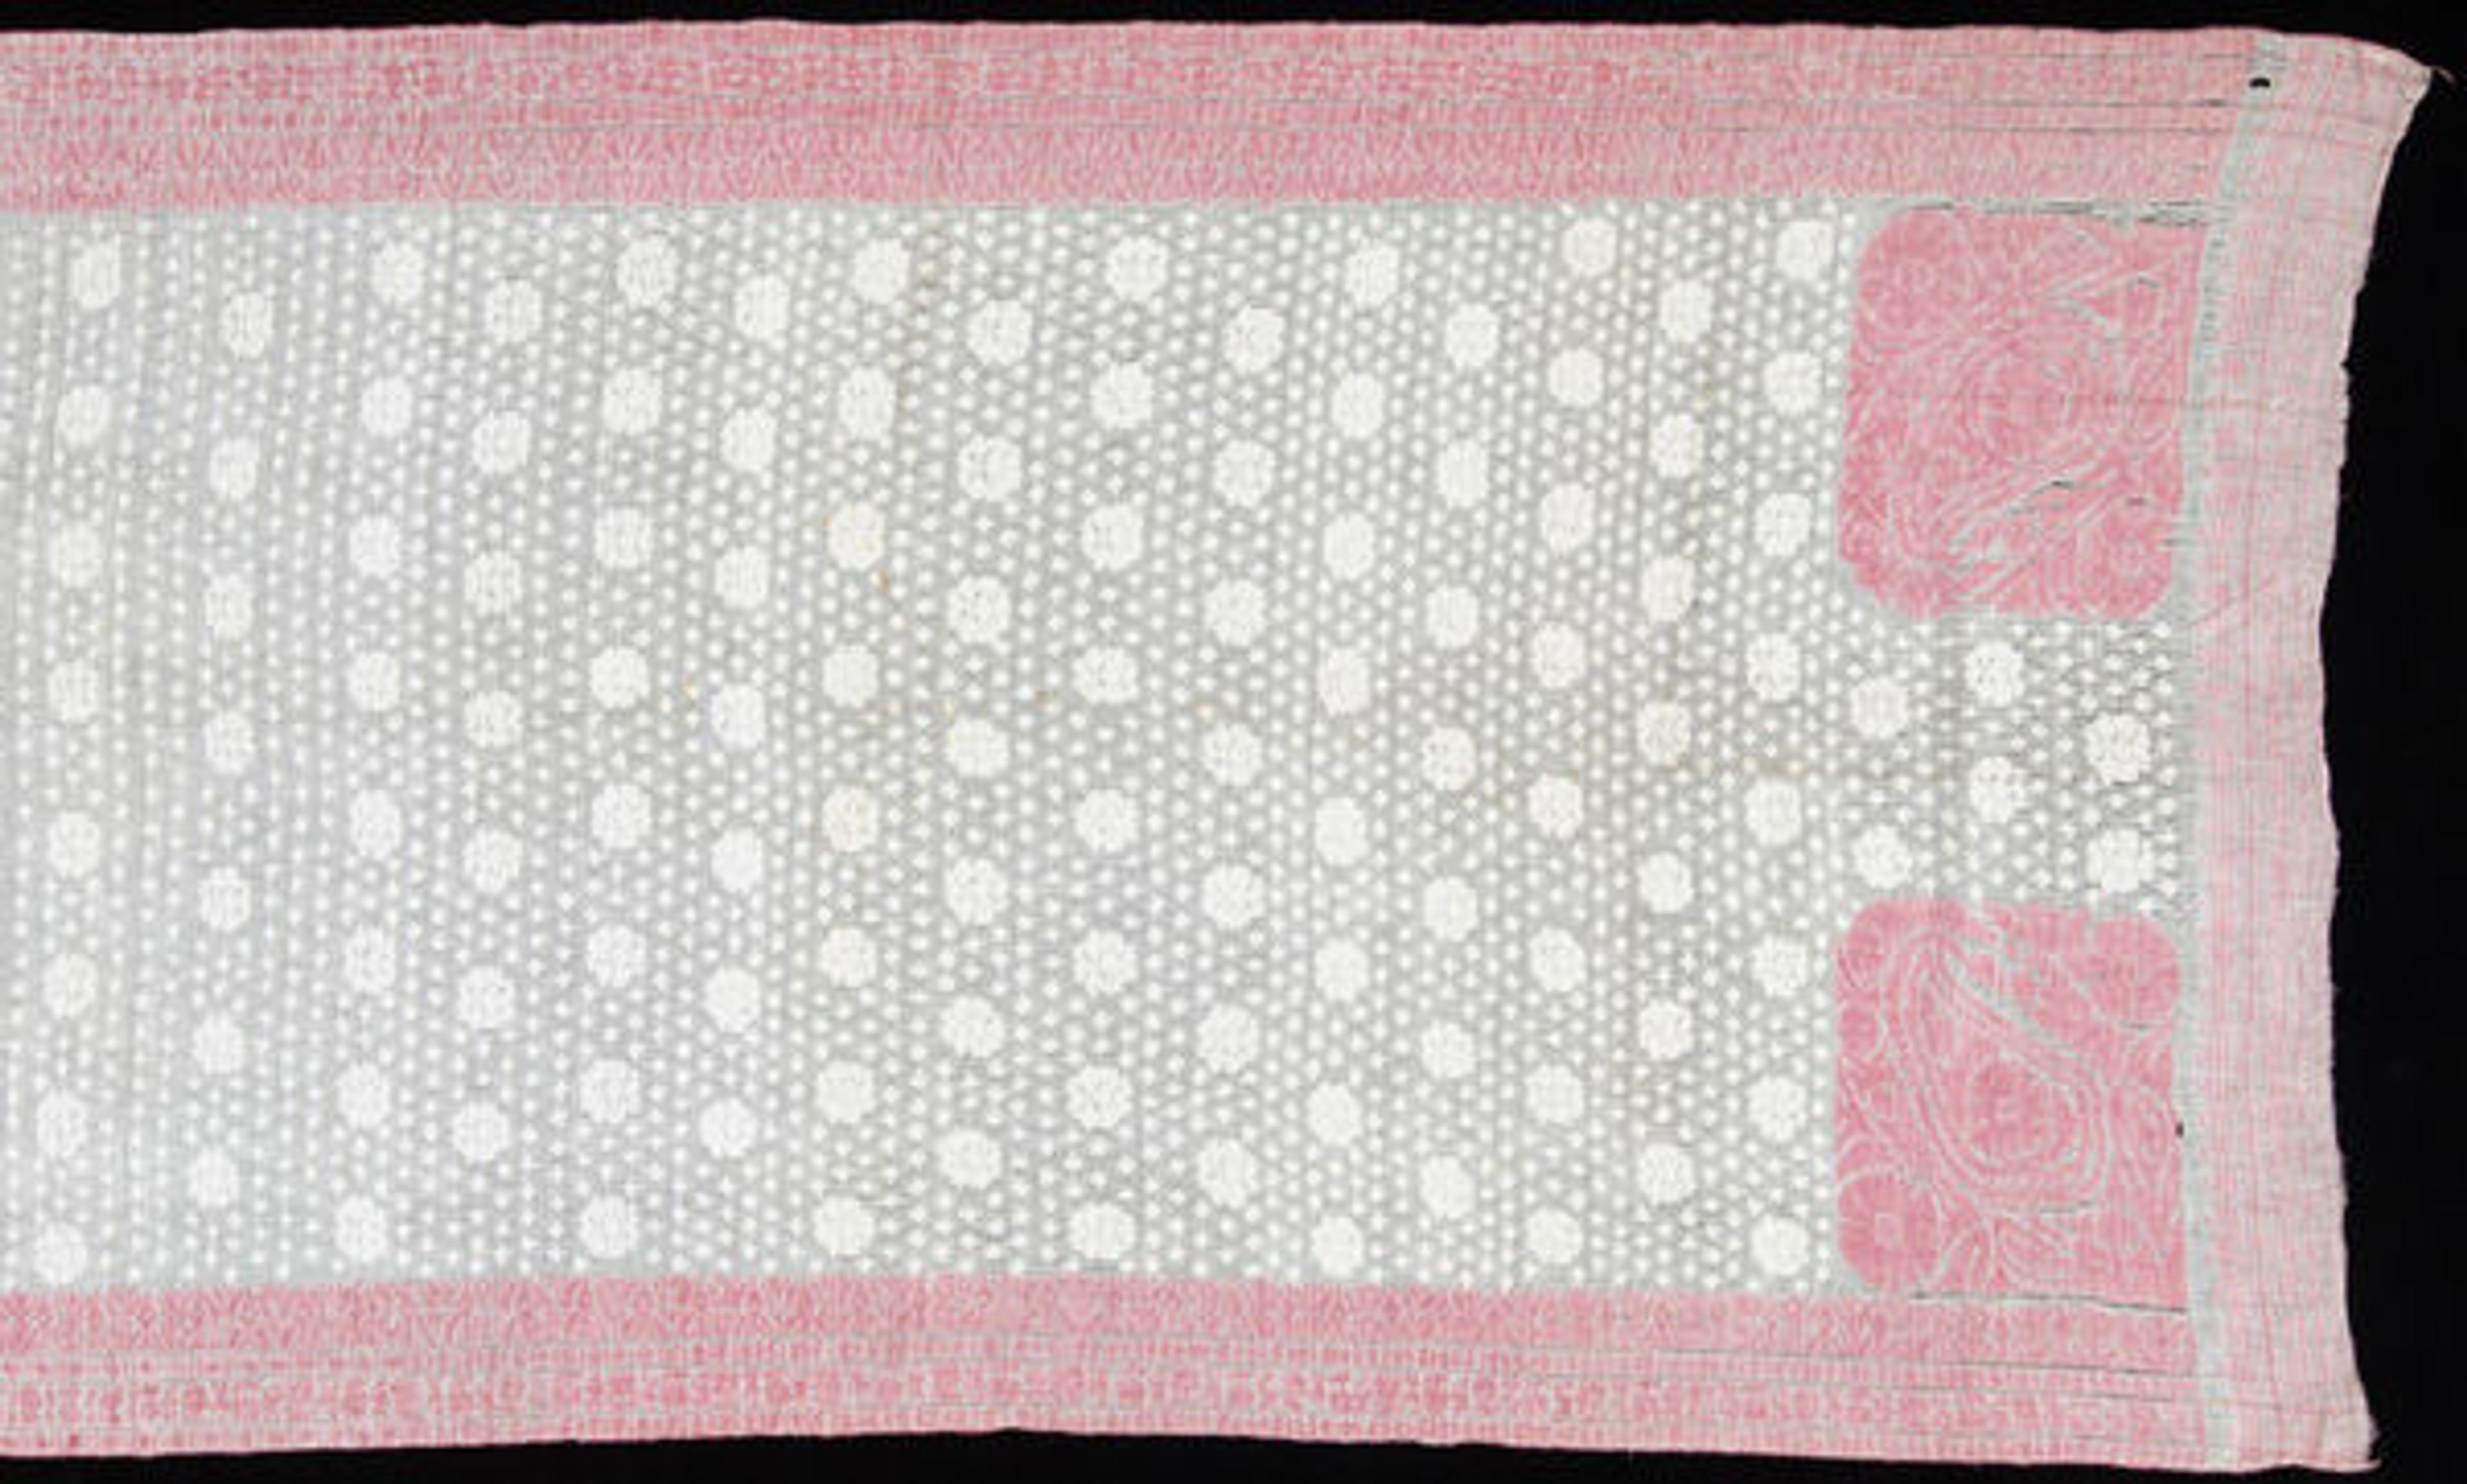 Jamdani Sari, late 19th–early 20th century. Made in Murshidabad, West Bengal, India, Asia, or made in Dhaka, Dhaka Division, Bangladesh, Asia. Cotton plain weave with discontinuous supplementary wefts. Philadelphia Museum of Art, Bequest of Mrs. Harry Markoe, 1943 (1943-51-154)